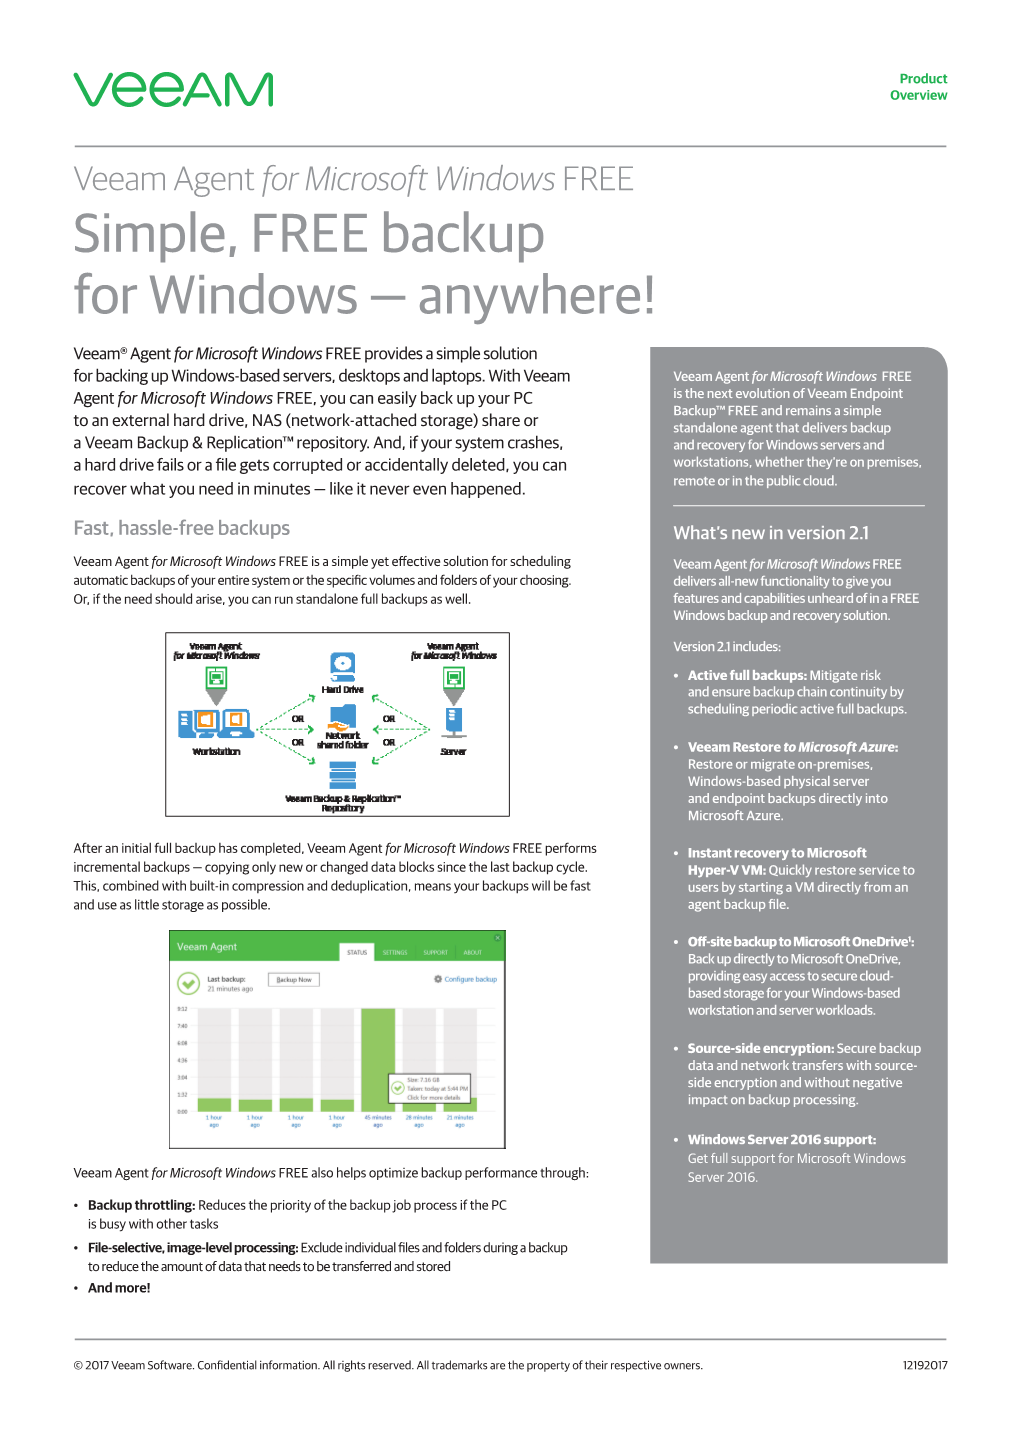 Simple, FREE Backup for Windows — Anywhere!